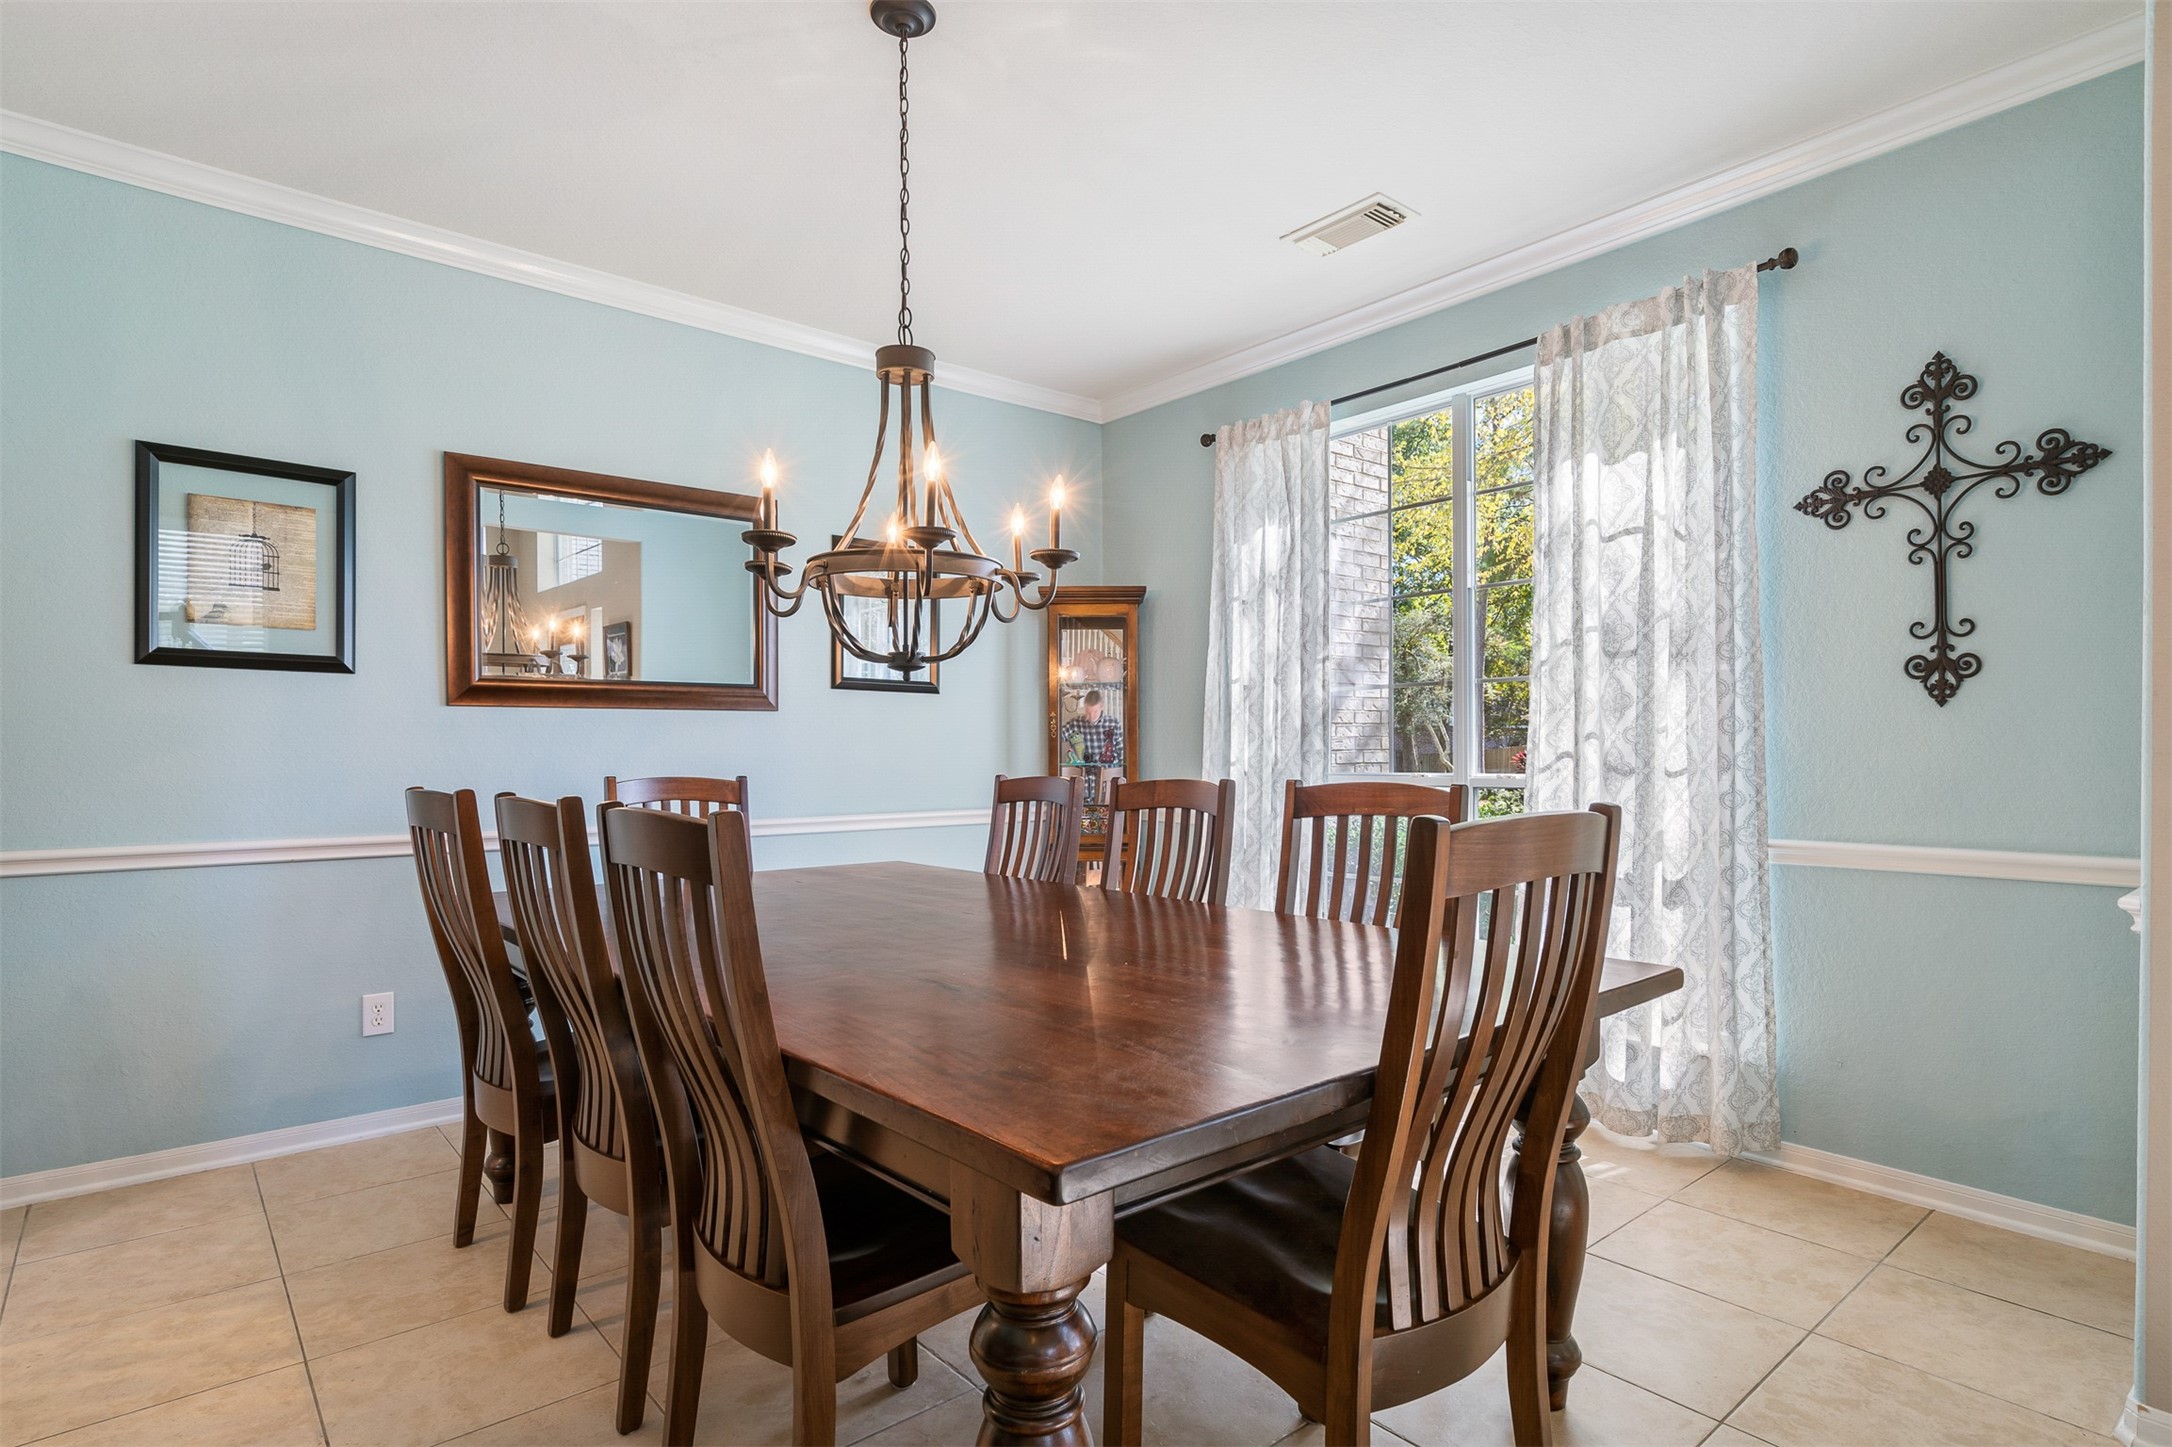 This dining room will accommodate large furniture!